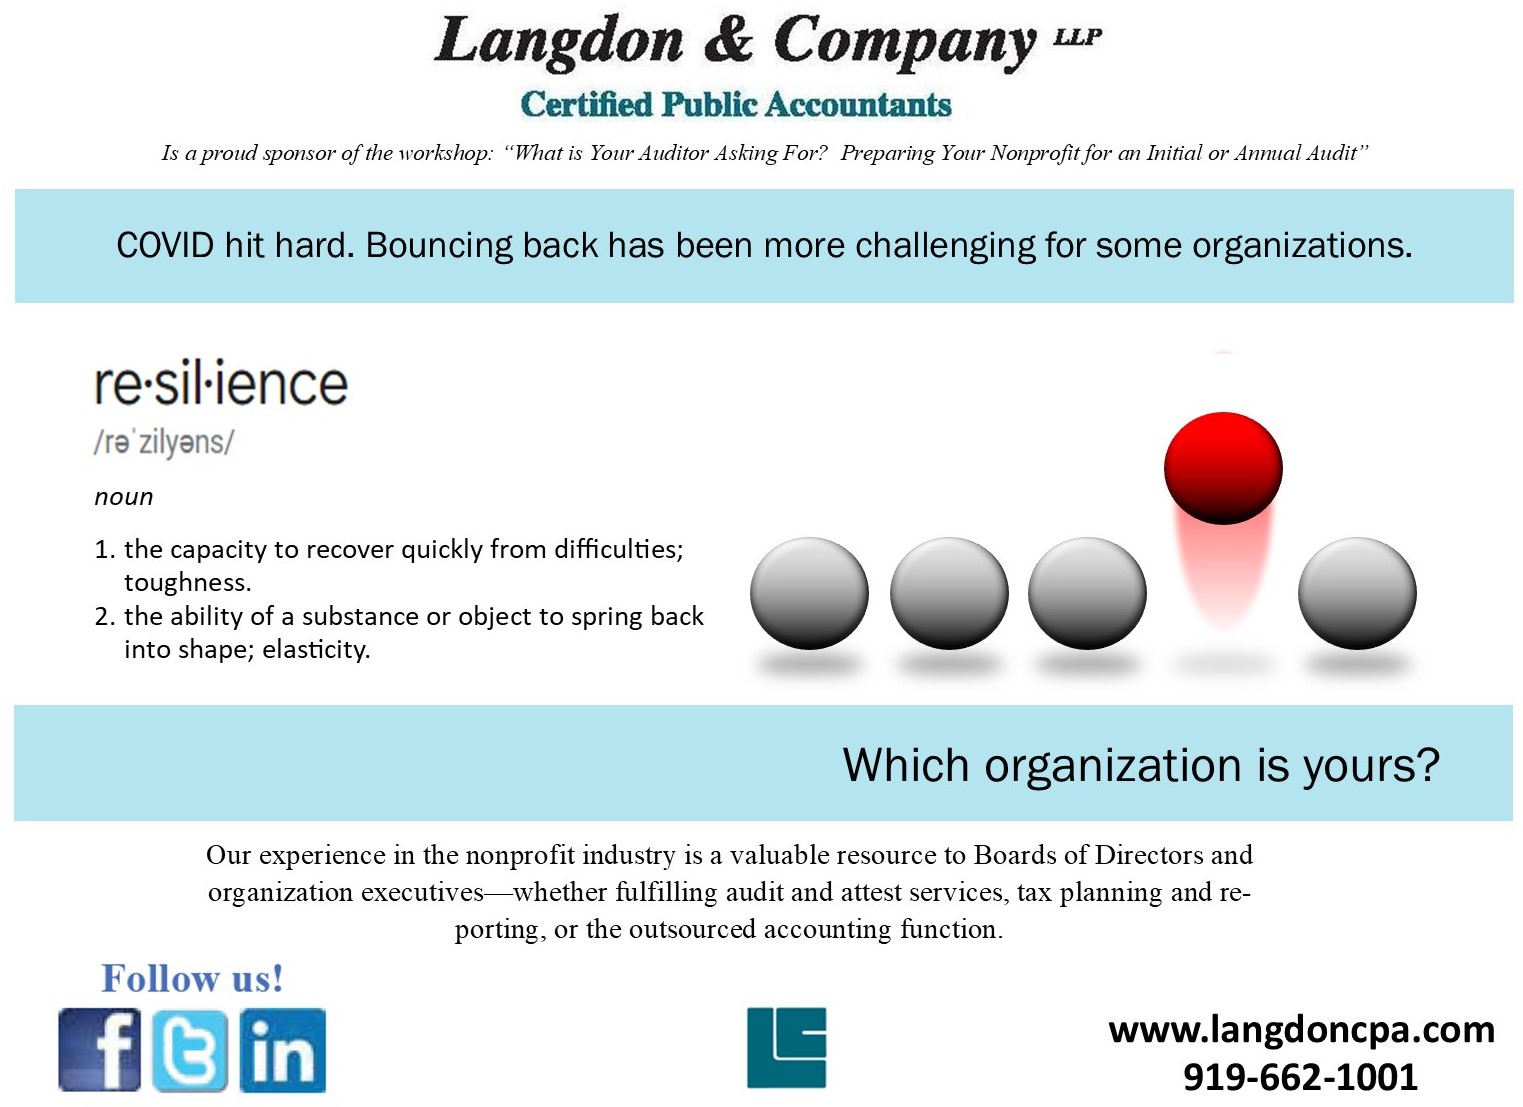 Langdon & Company CPAs Sponsor Ad on Resilience